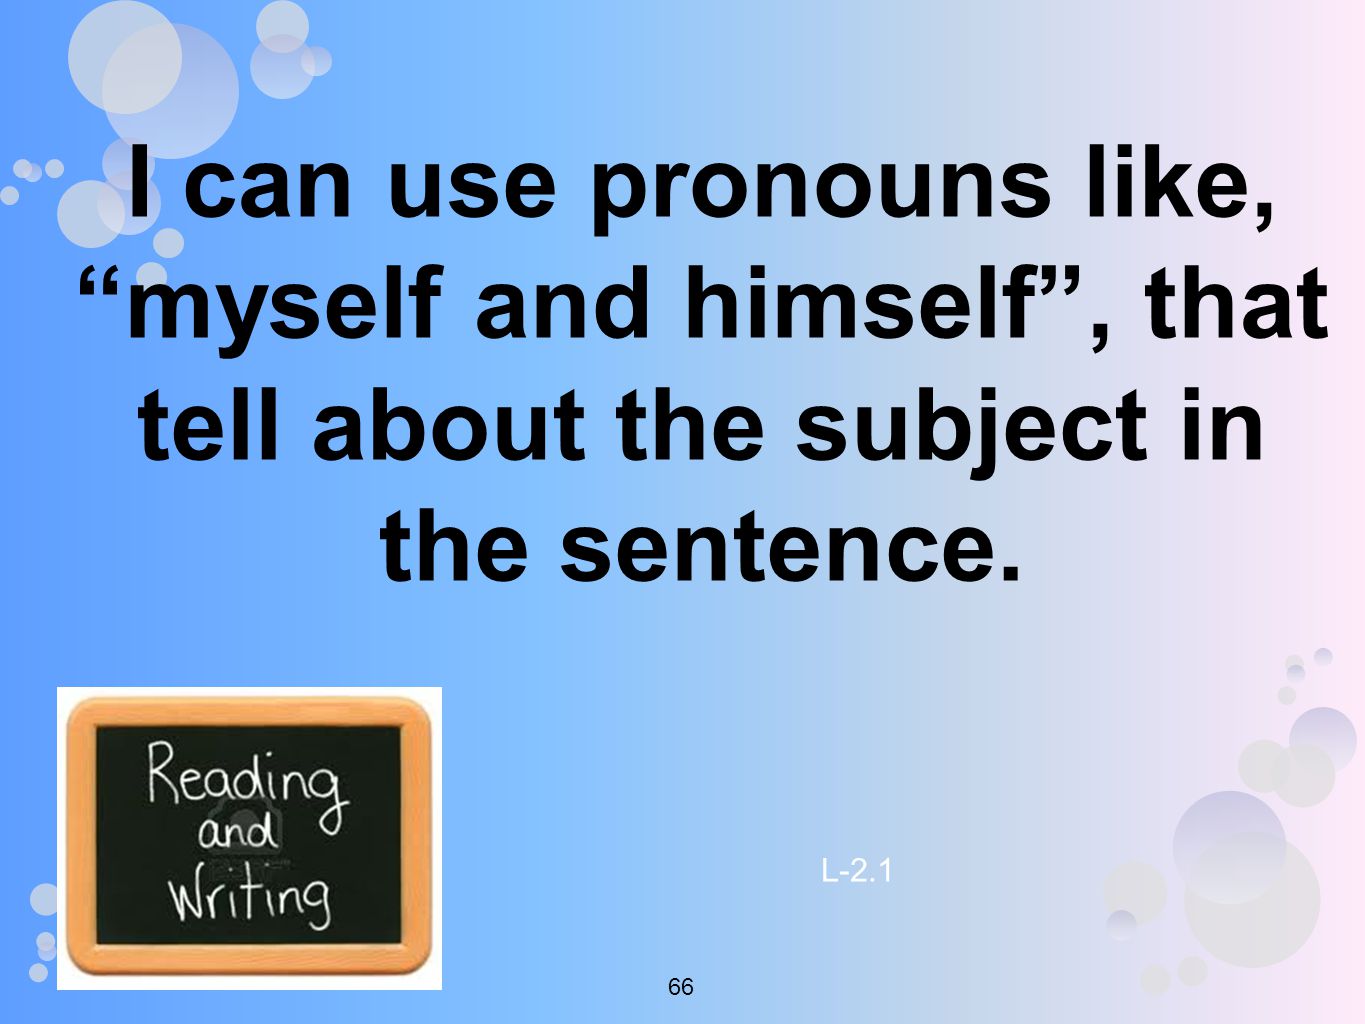 I can use pronouns like, myself and himself , that tell about the subject in the sentence.